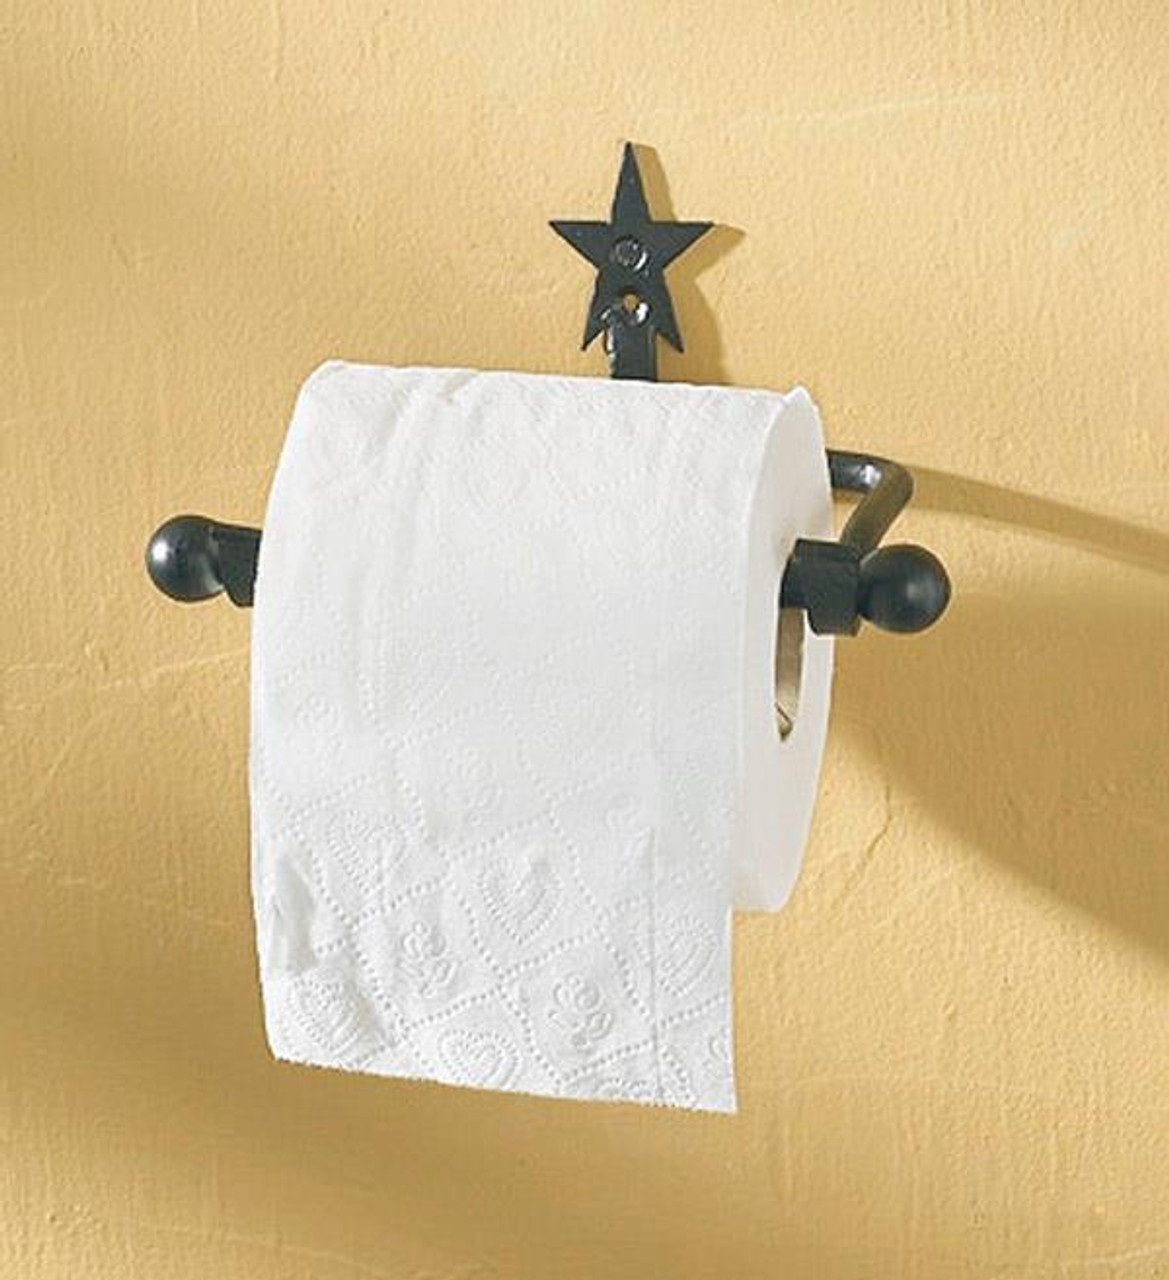 https://cdn11.bigcommerce.com/s-tfdhmk/images/stencil/1280x1280/products/3639/175484/Star-Toilet-Tissue-Holder-762242218567_image1__26247.1689041657.jpg?c=2